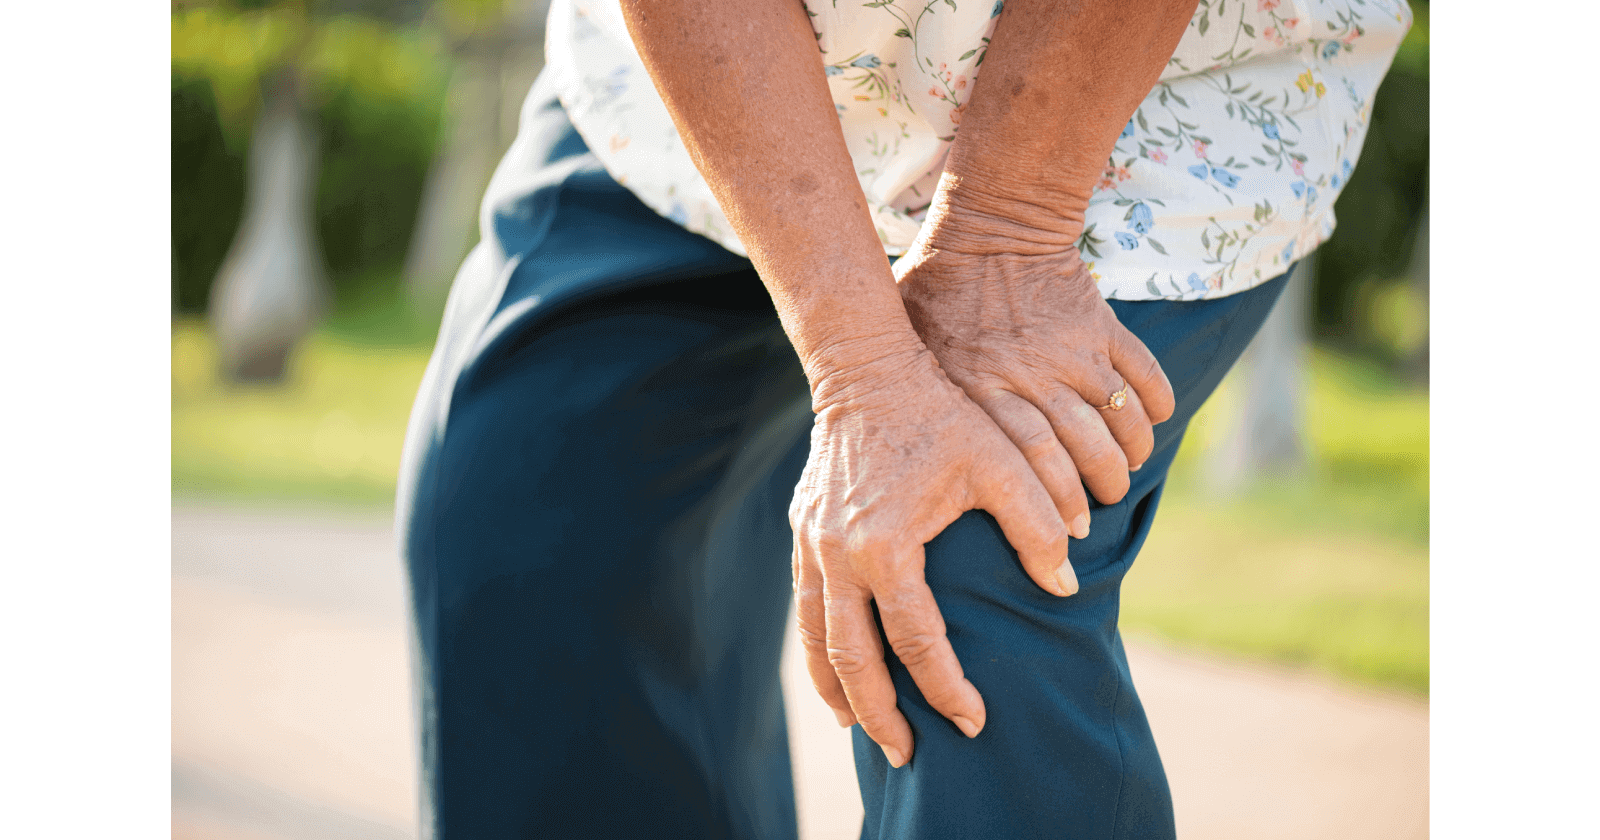 Knee Pain: Meaning, symptoms, causes, and other details